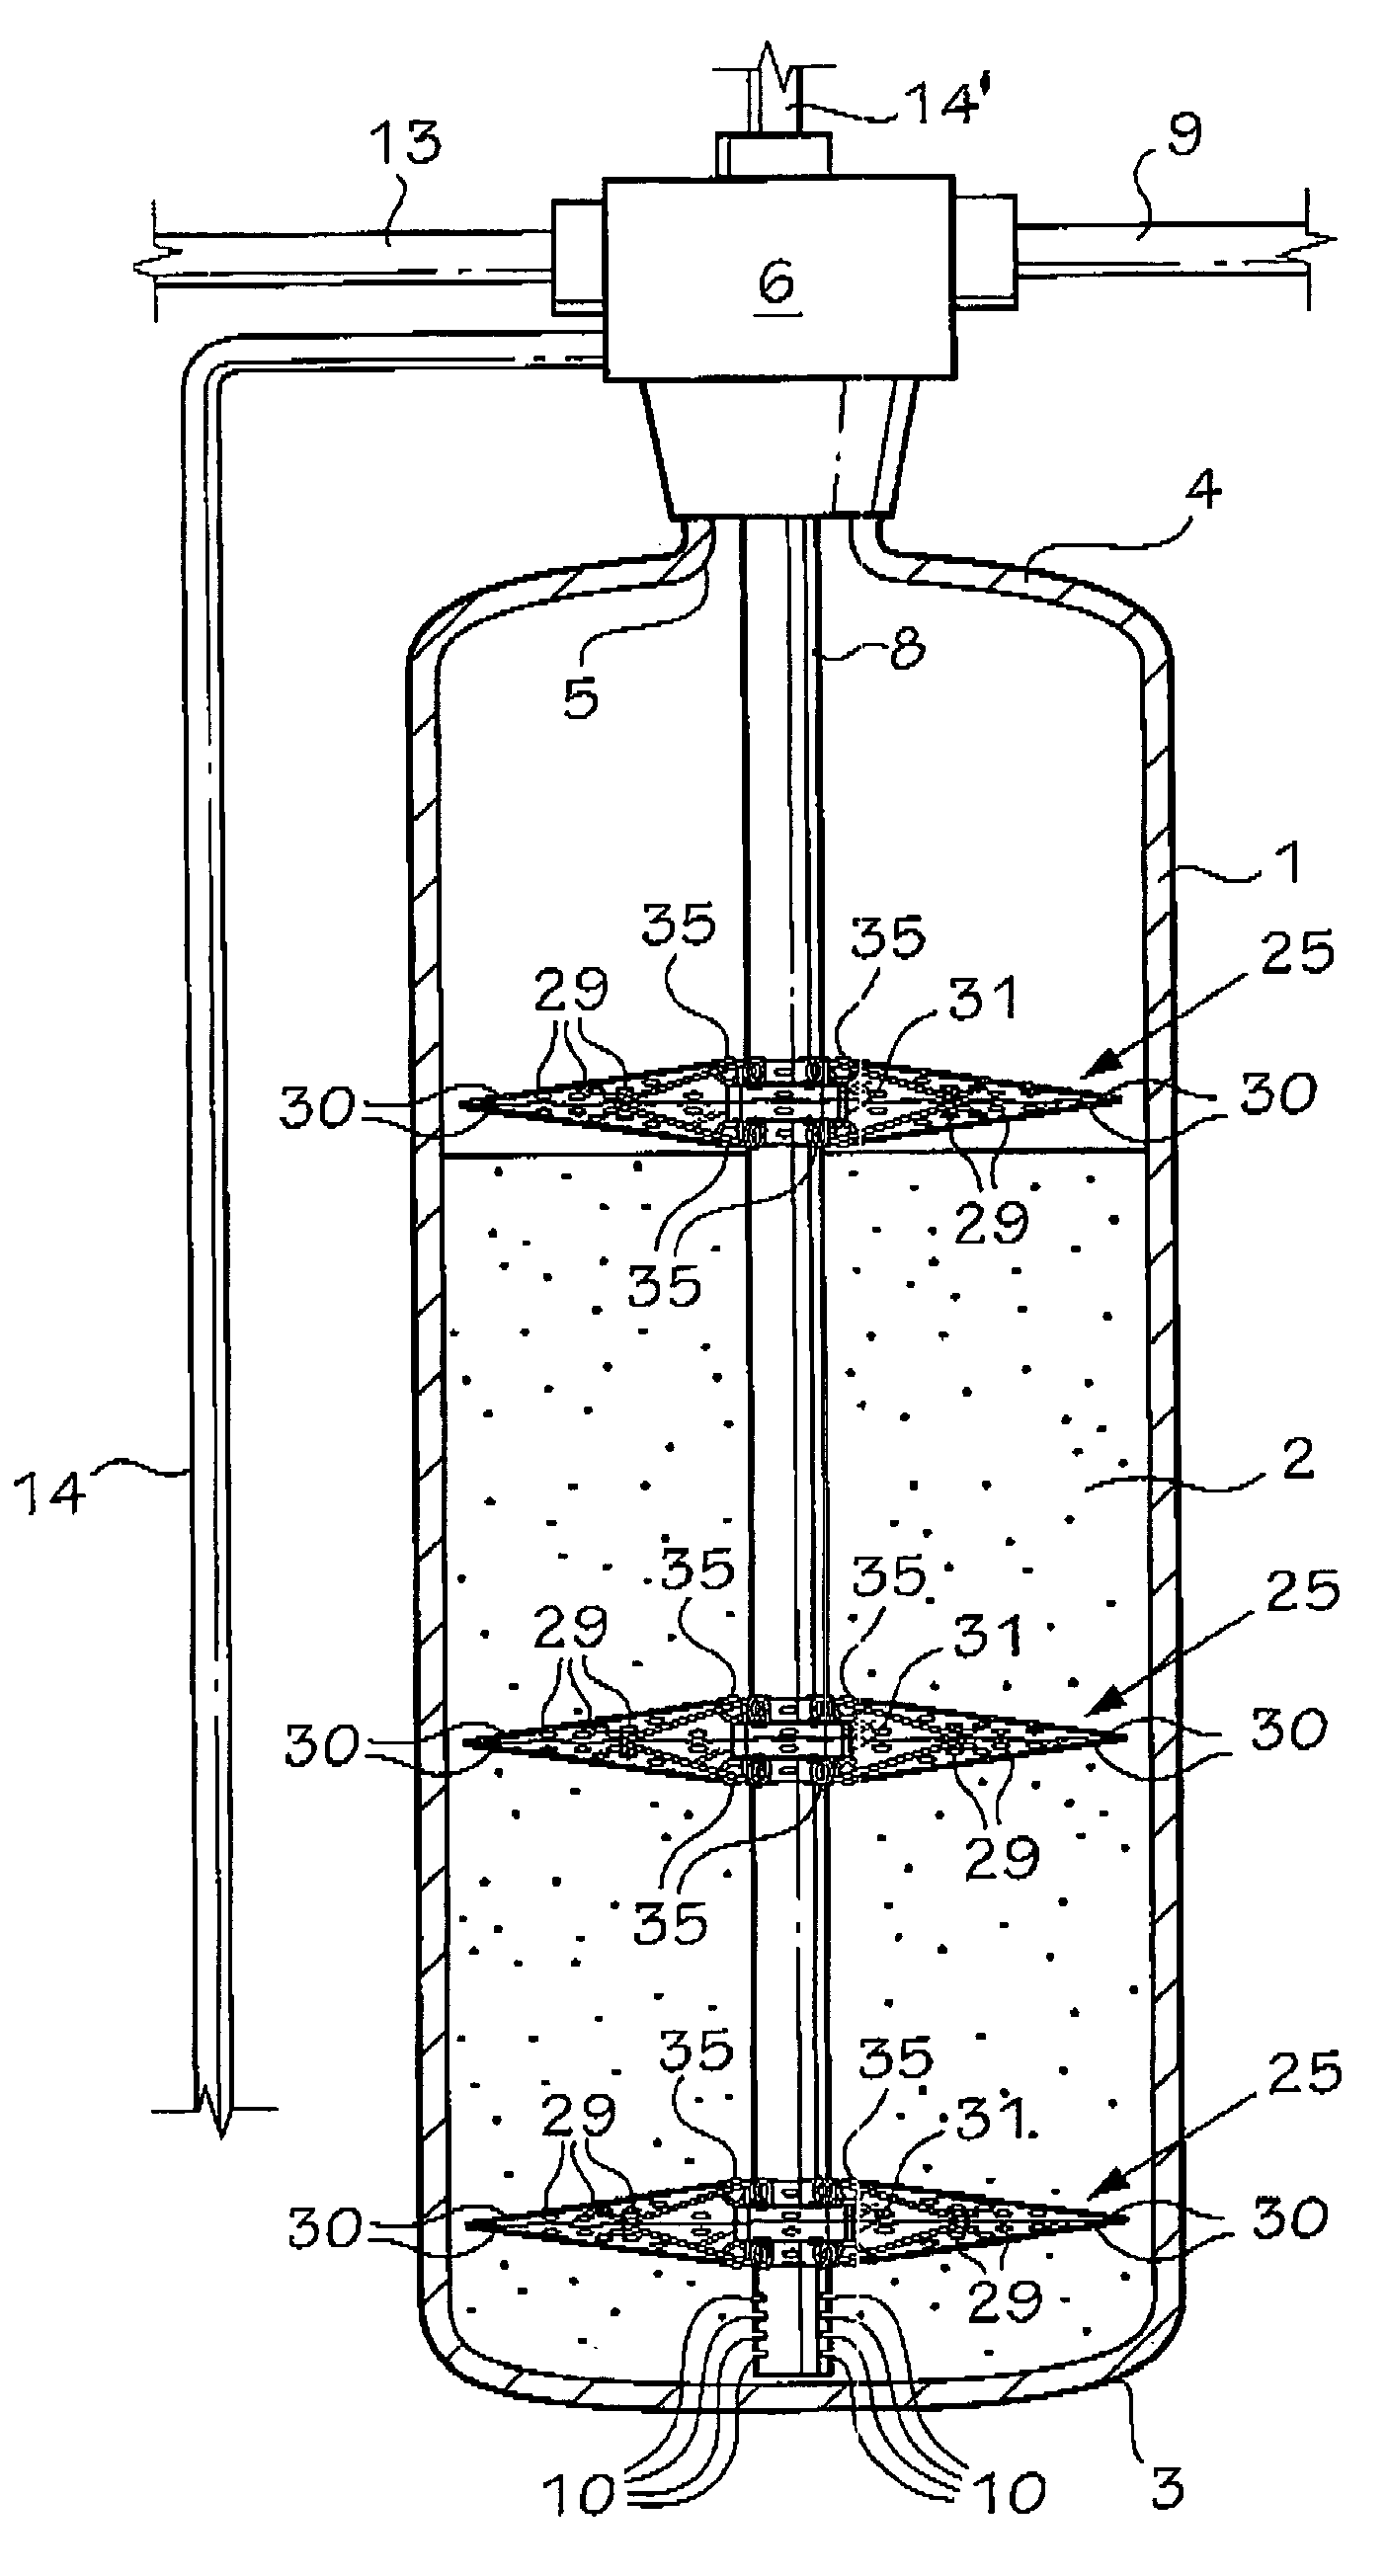 Water conditioner assembly